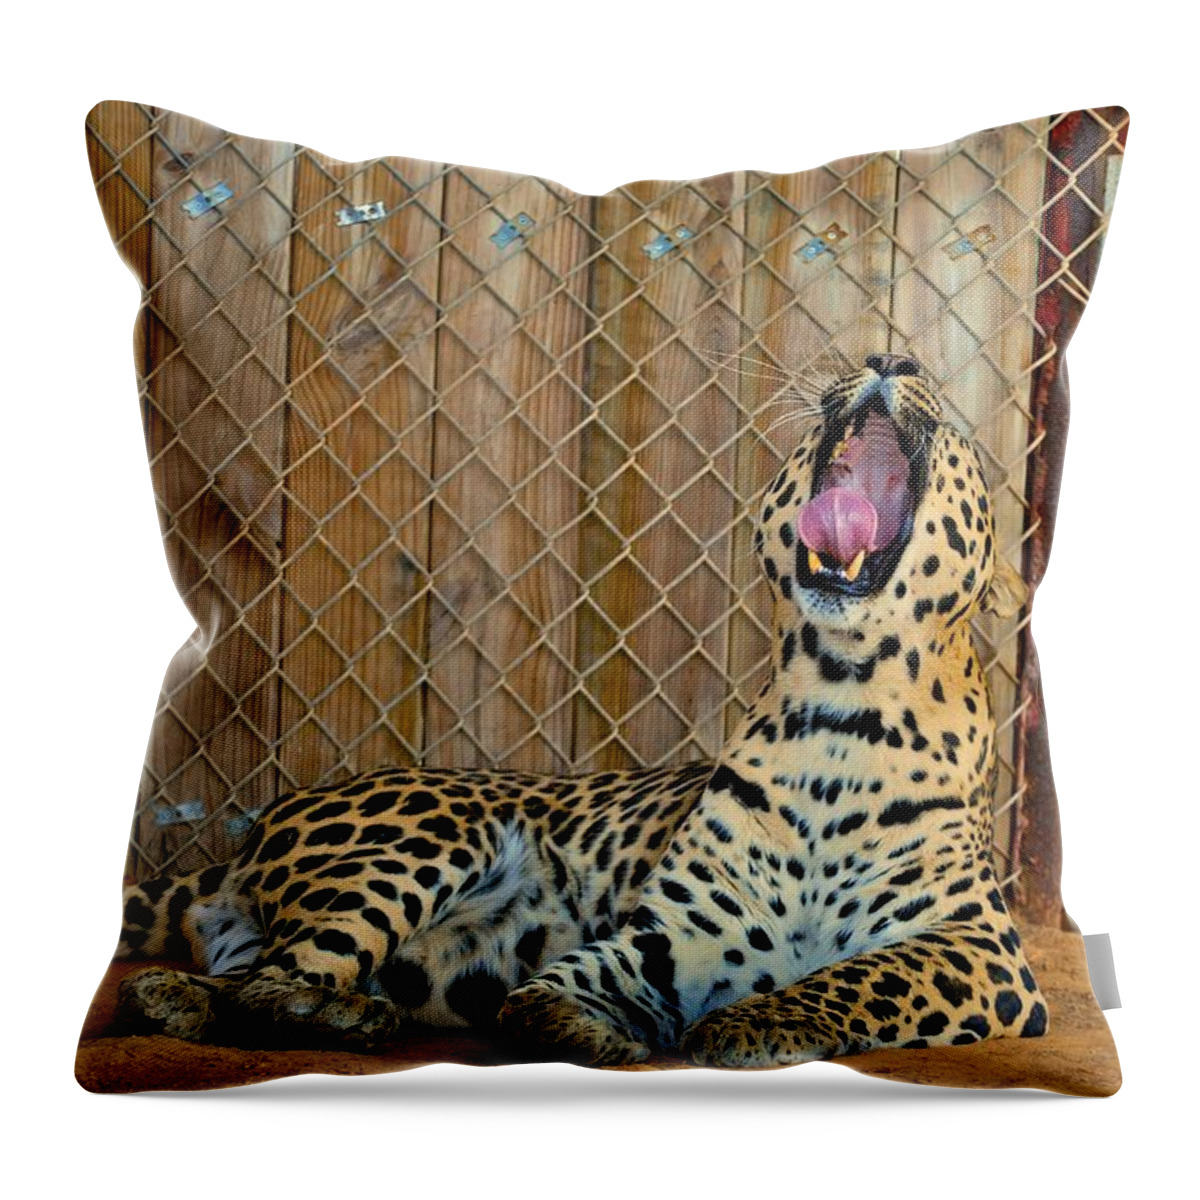 Leopards Throw Pillow featuring the photograph Spot by Donna Shahan